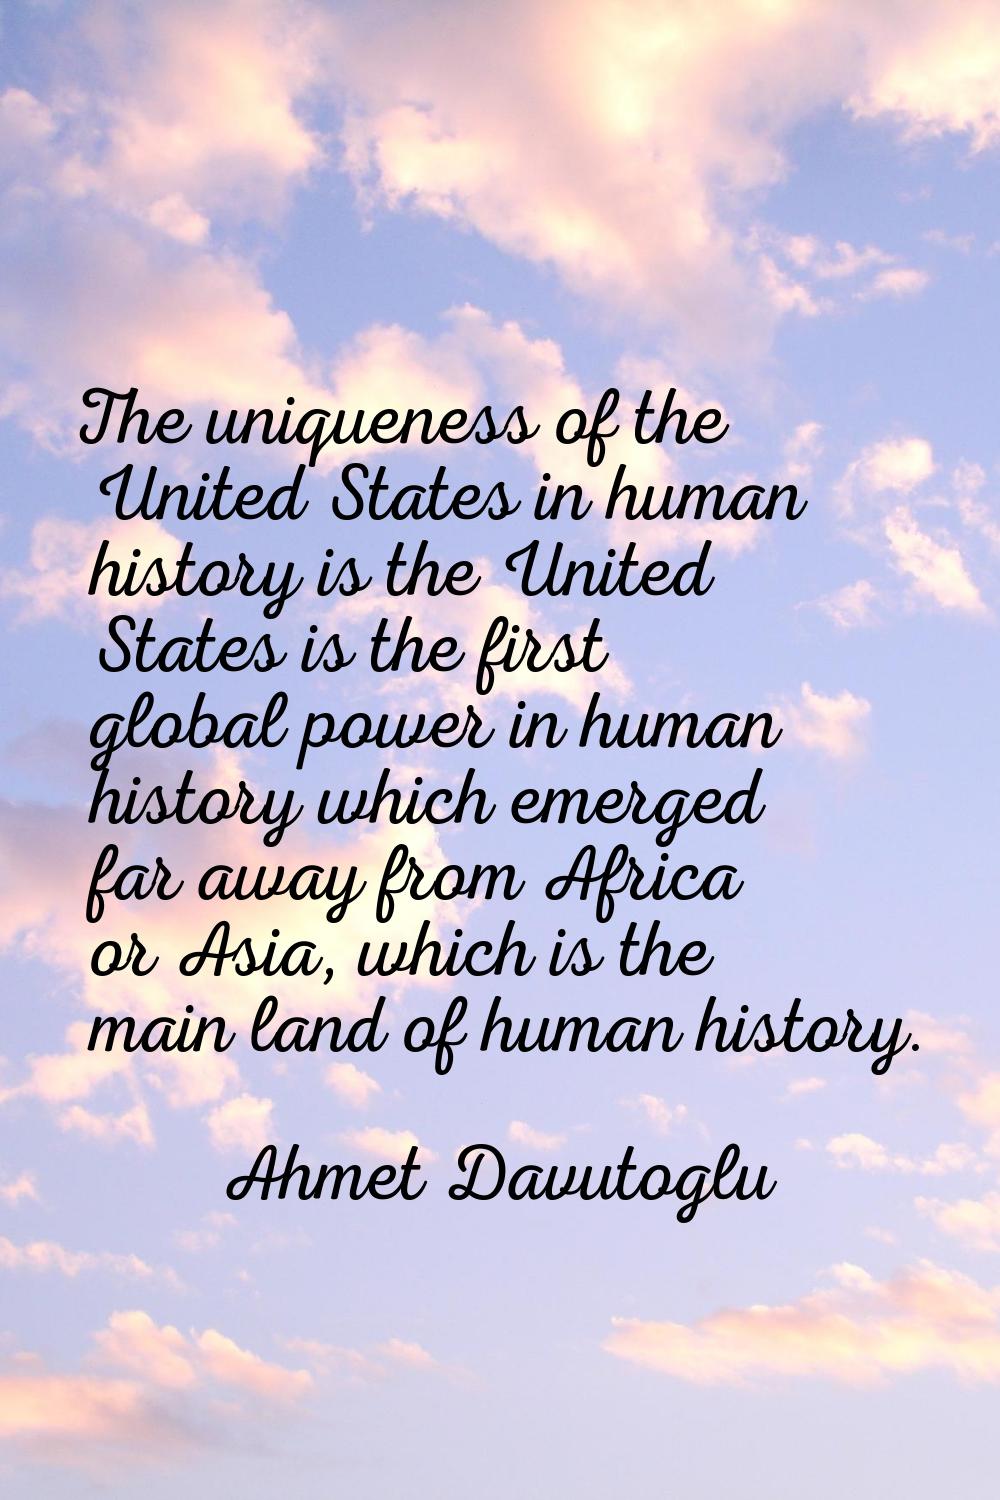 The uniqueness of the United States in human history is the United States is the first global power